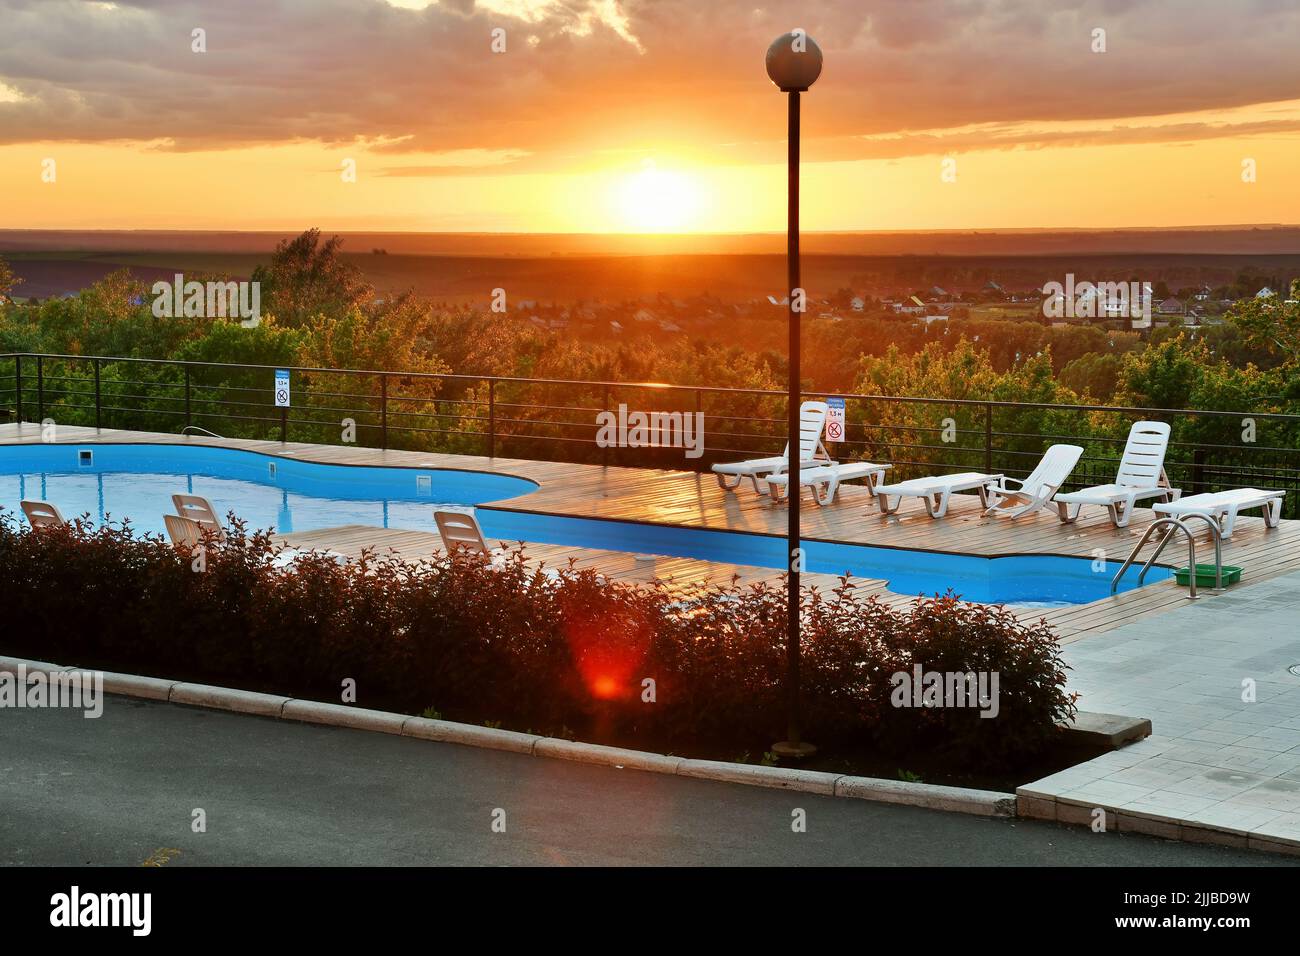 Sunset over the hill and hotel with the pool and loungers. Relaxation, travel, leisure activity Stock Photo